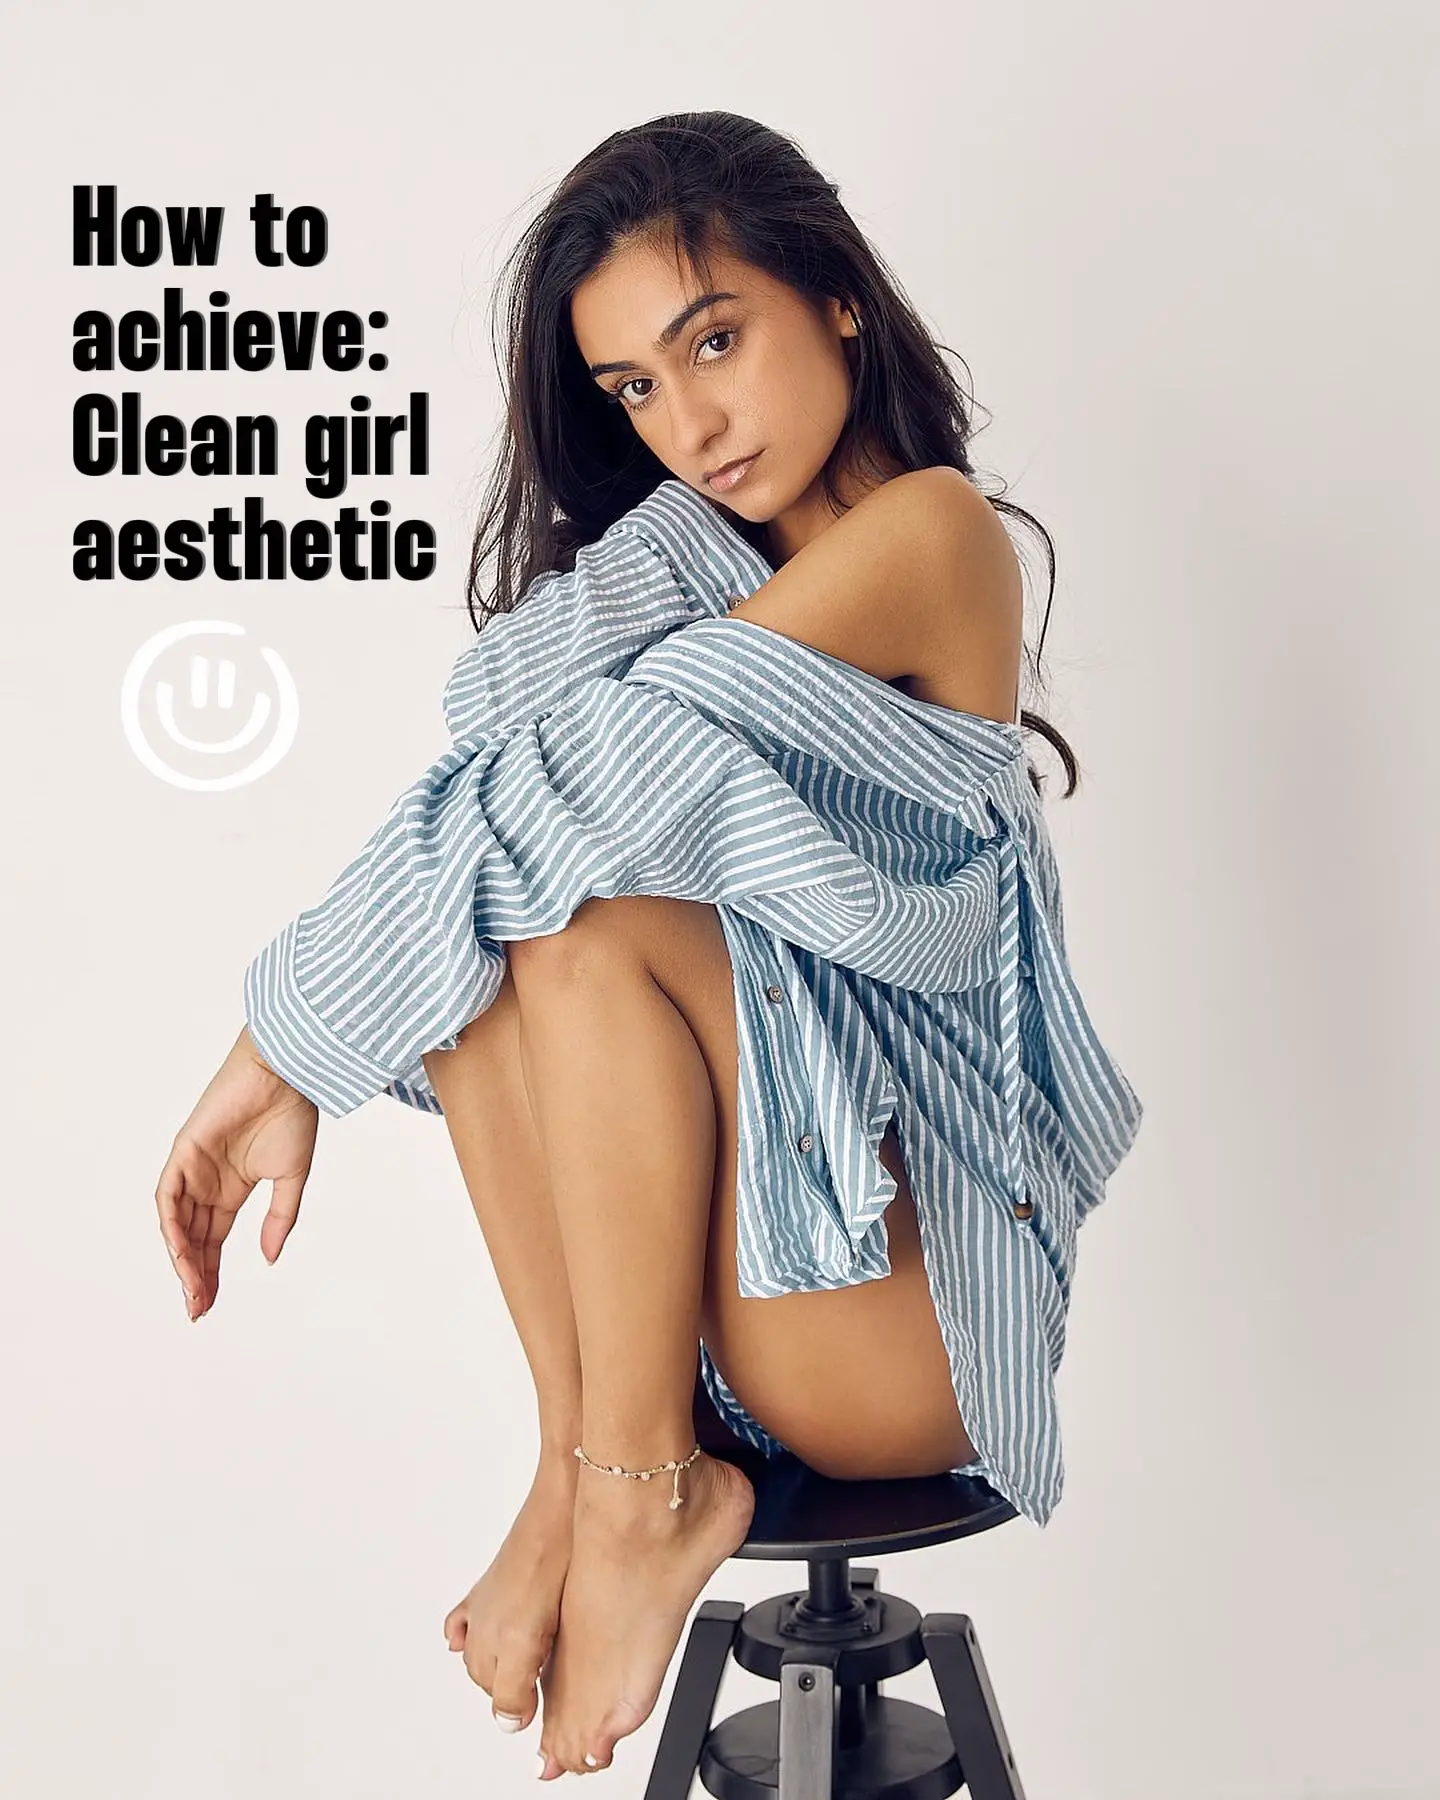 Achieving the Ultimate Clean Girl Aesthetic